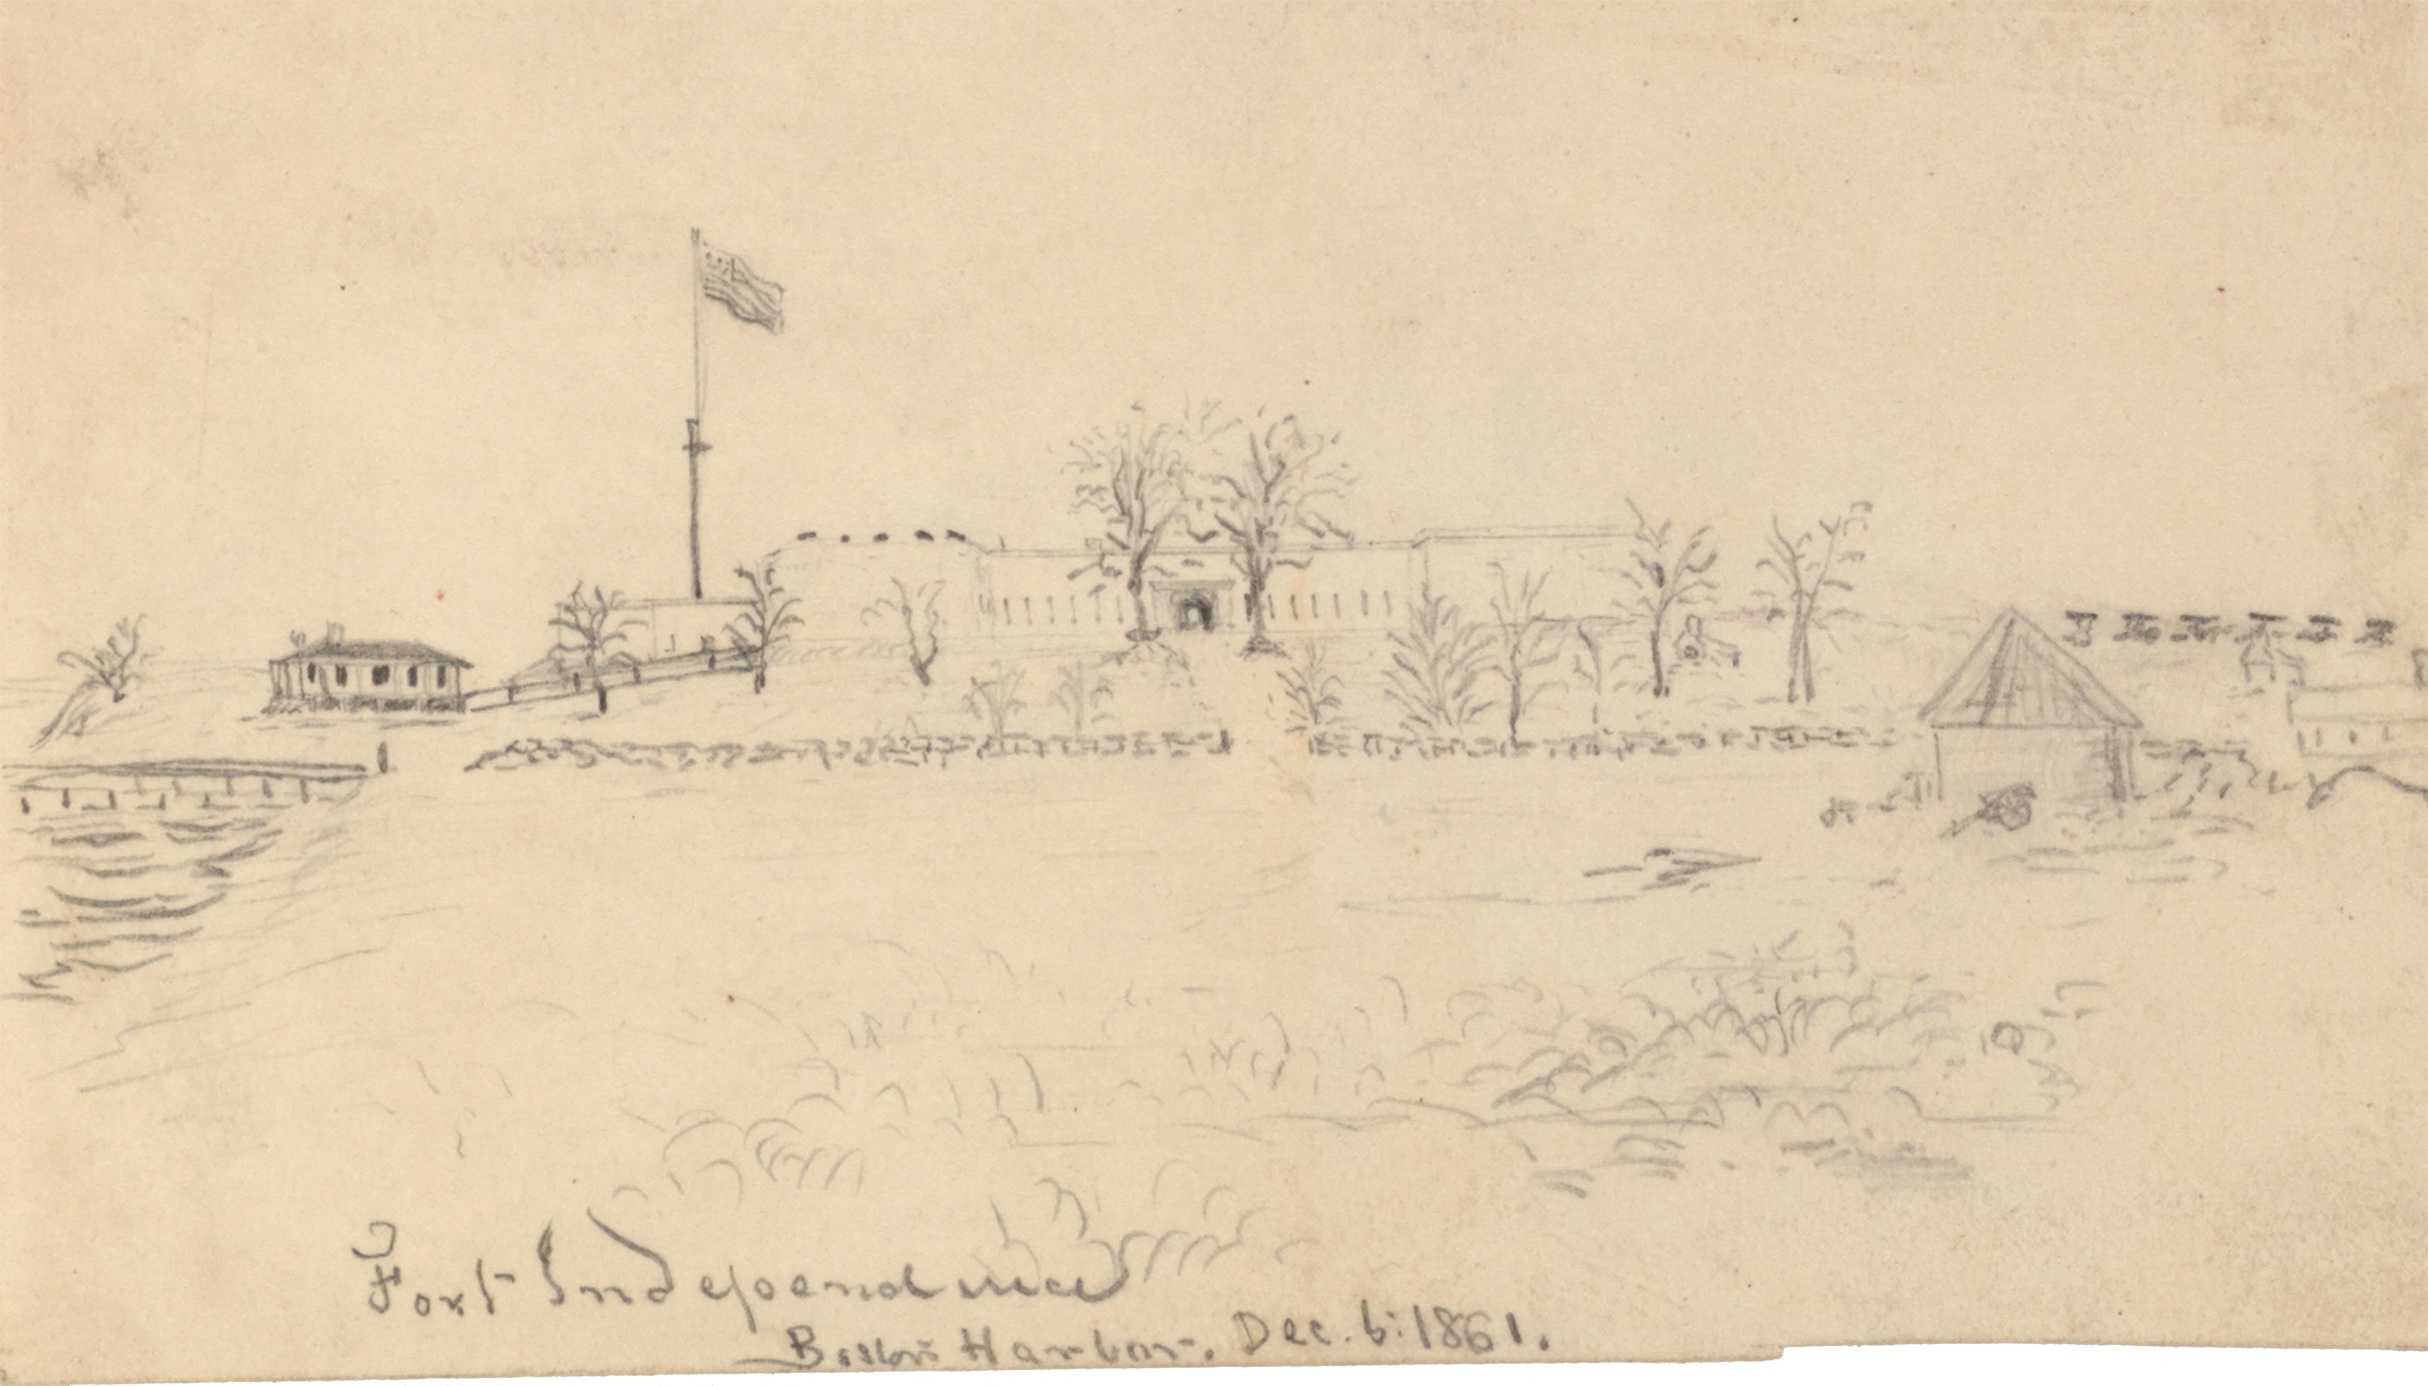 Fort Independence on Castle Island in Boston Harbor. The initial camp of the topographical engineer recruits, it was built by the Corps of Engineers before the Civil War and highlights the engineering nature of Thompson’s Civil War service. (Library of Congress)